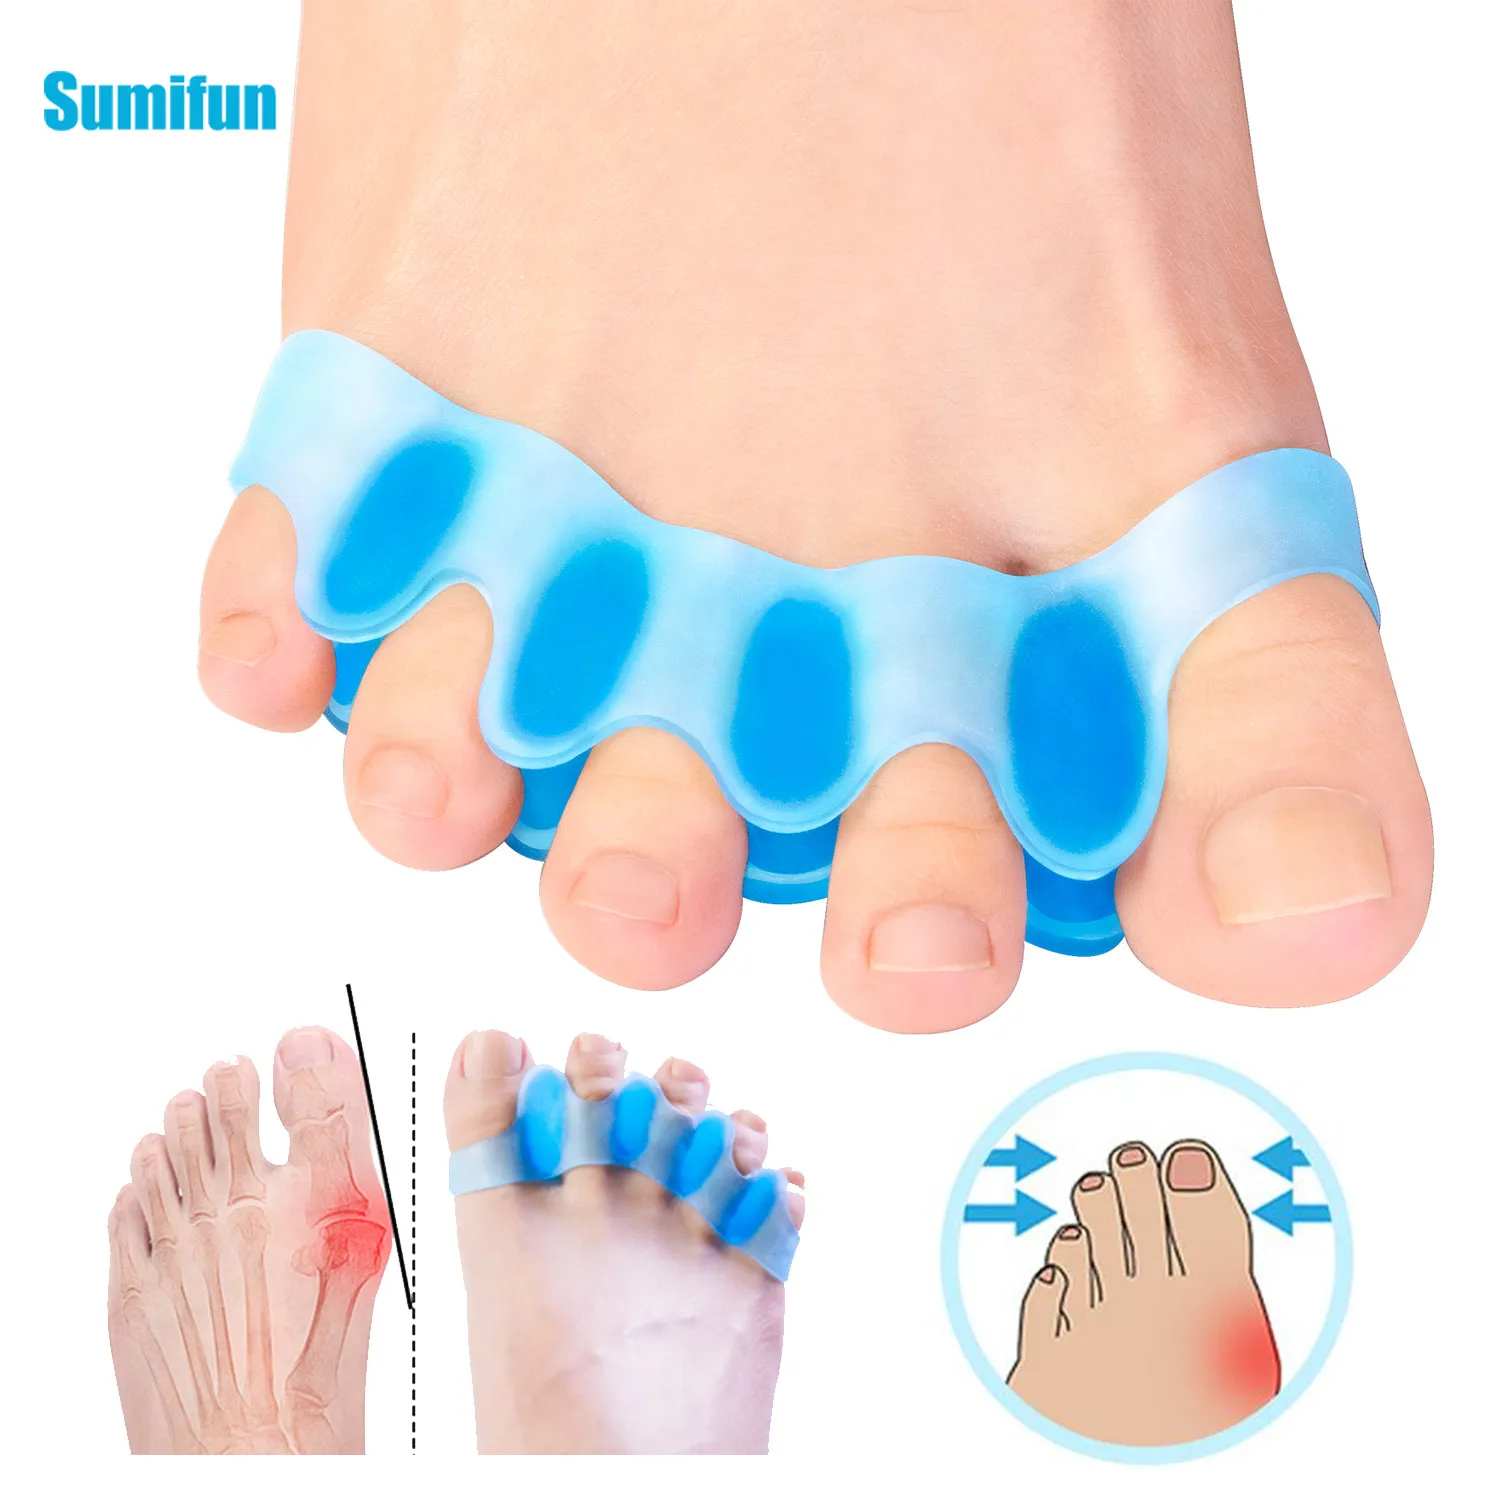 

4Pcs Blue Soft Silicone Toe Separator Treat Overlapping Toes Pain Relief Hallux Valgus Bunion Corrector Foot Care Accessories